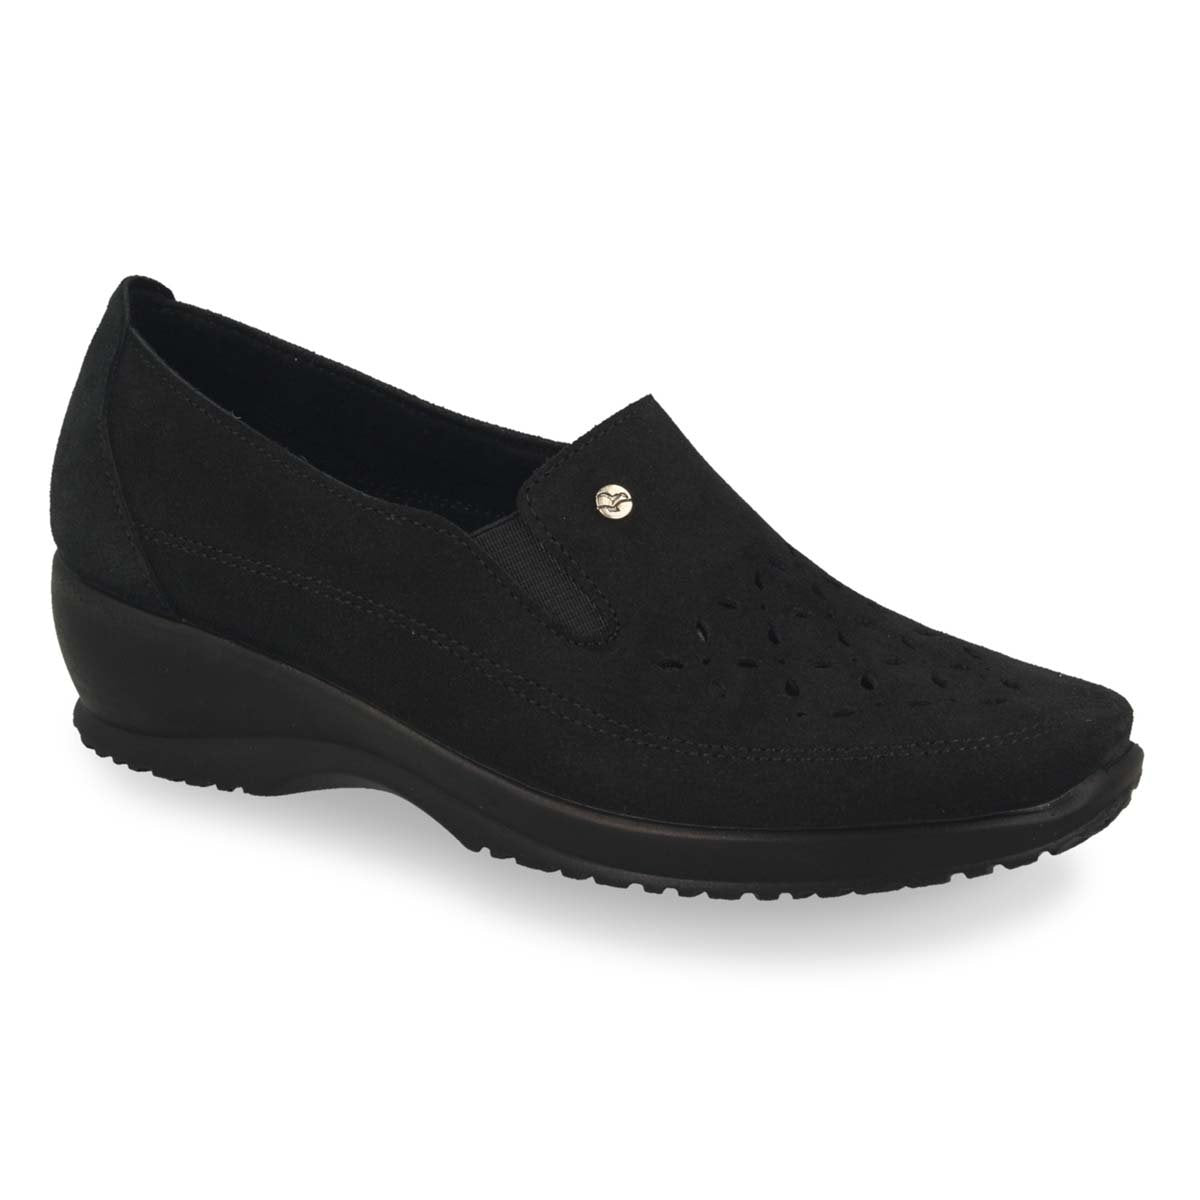 See the Black Leather Slip-On Women Shoes in the colour BLACK, available in various sizes